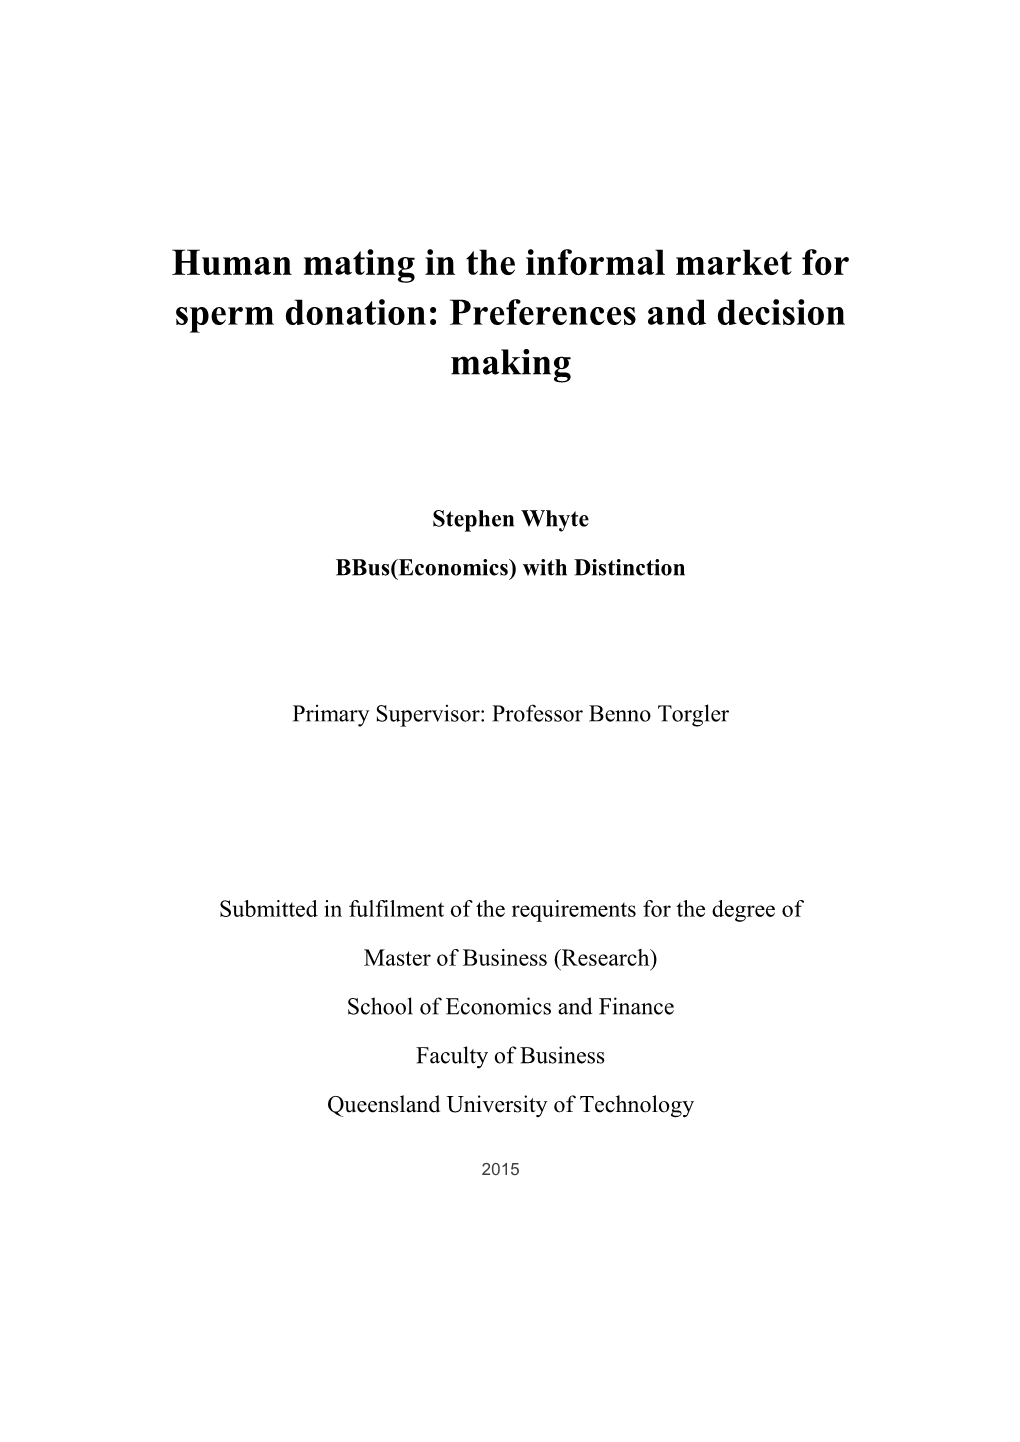 Human Mating in the Informal Market for Sperm Donation: Preferences and Decision Making